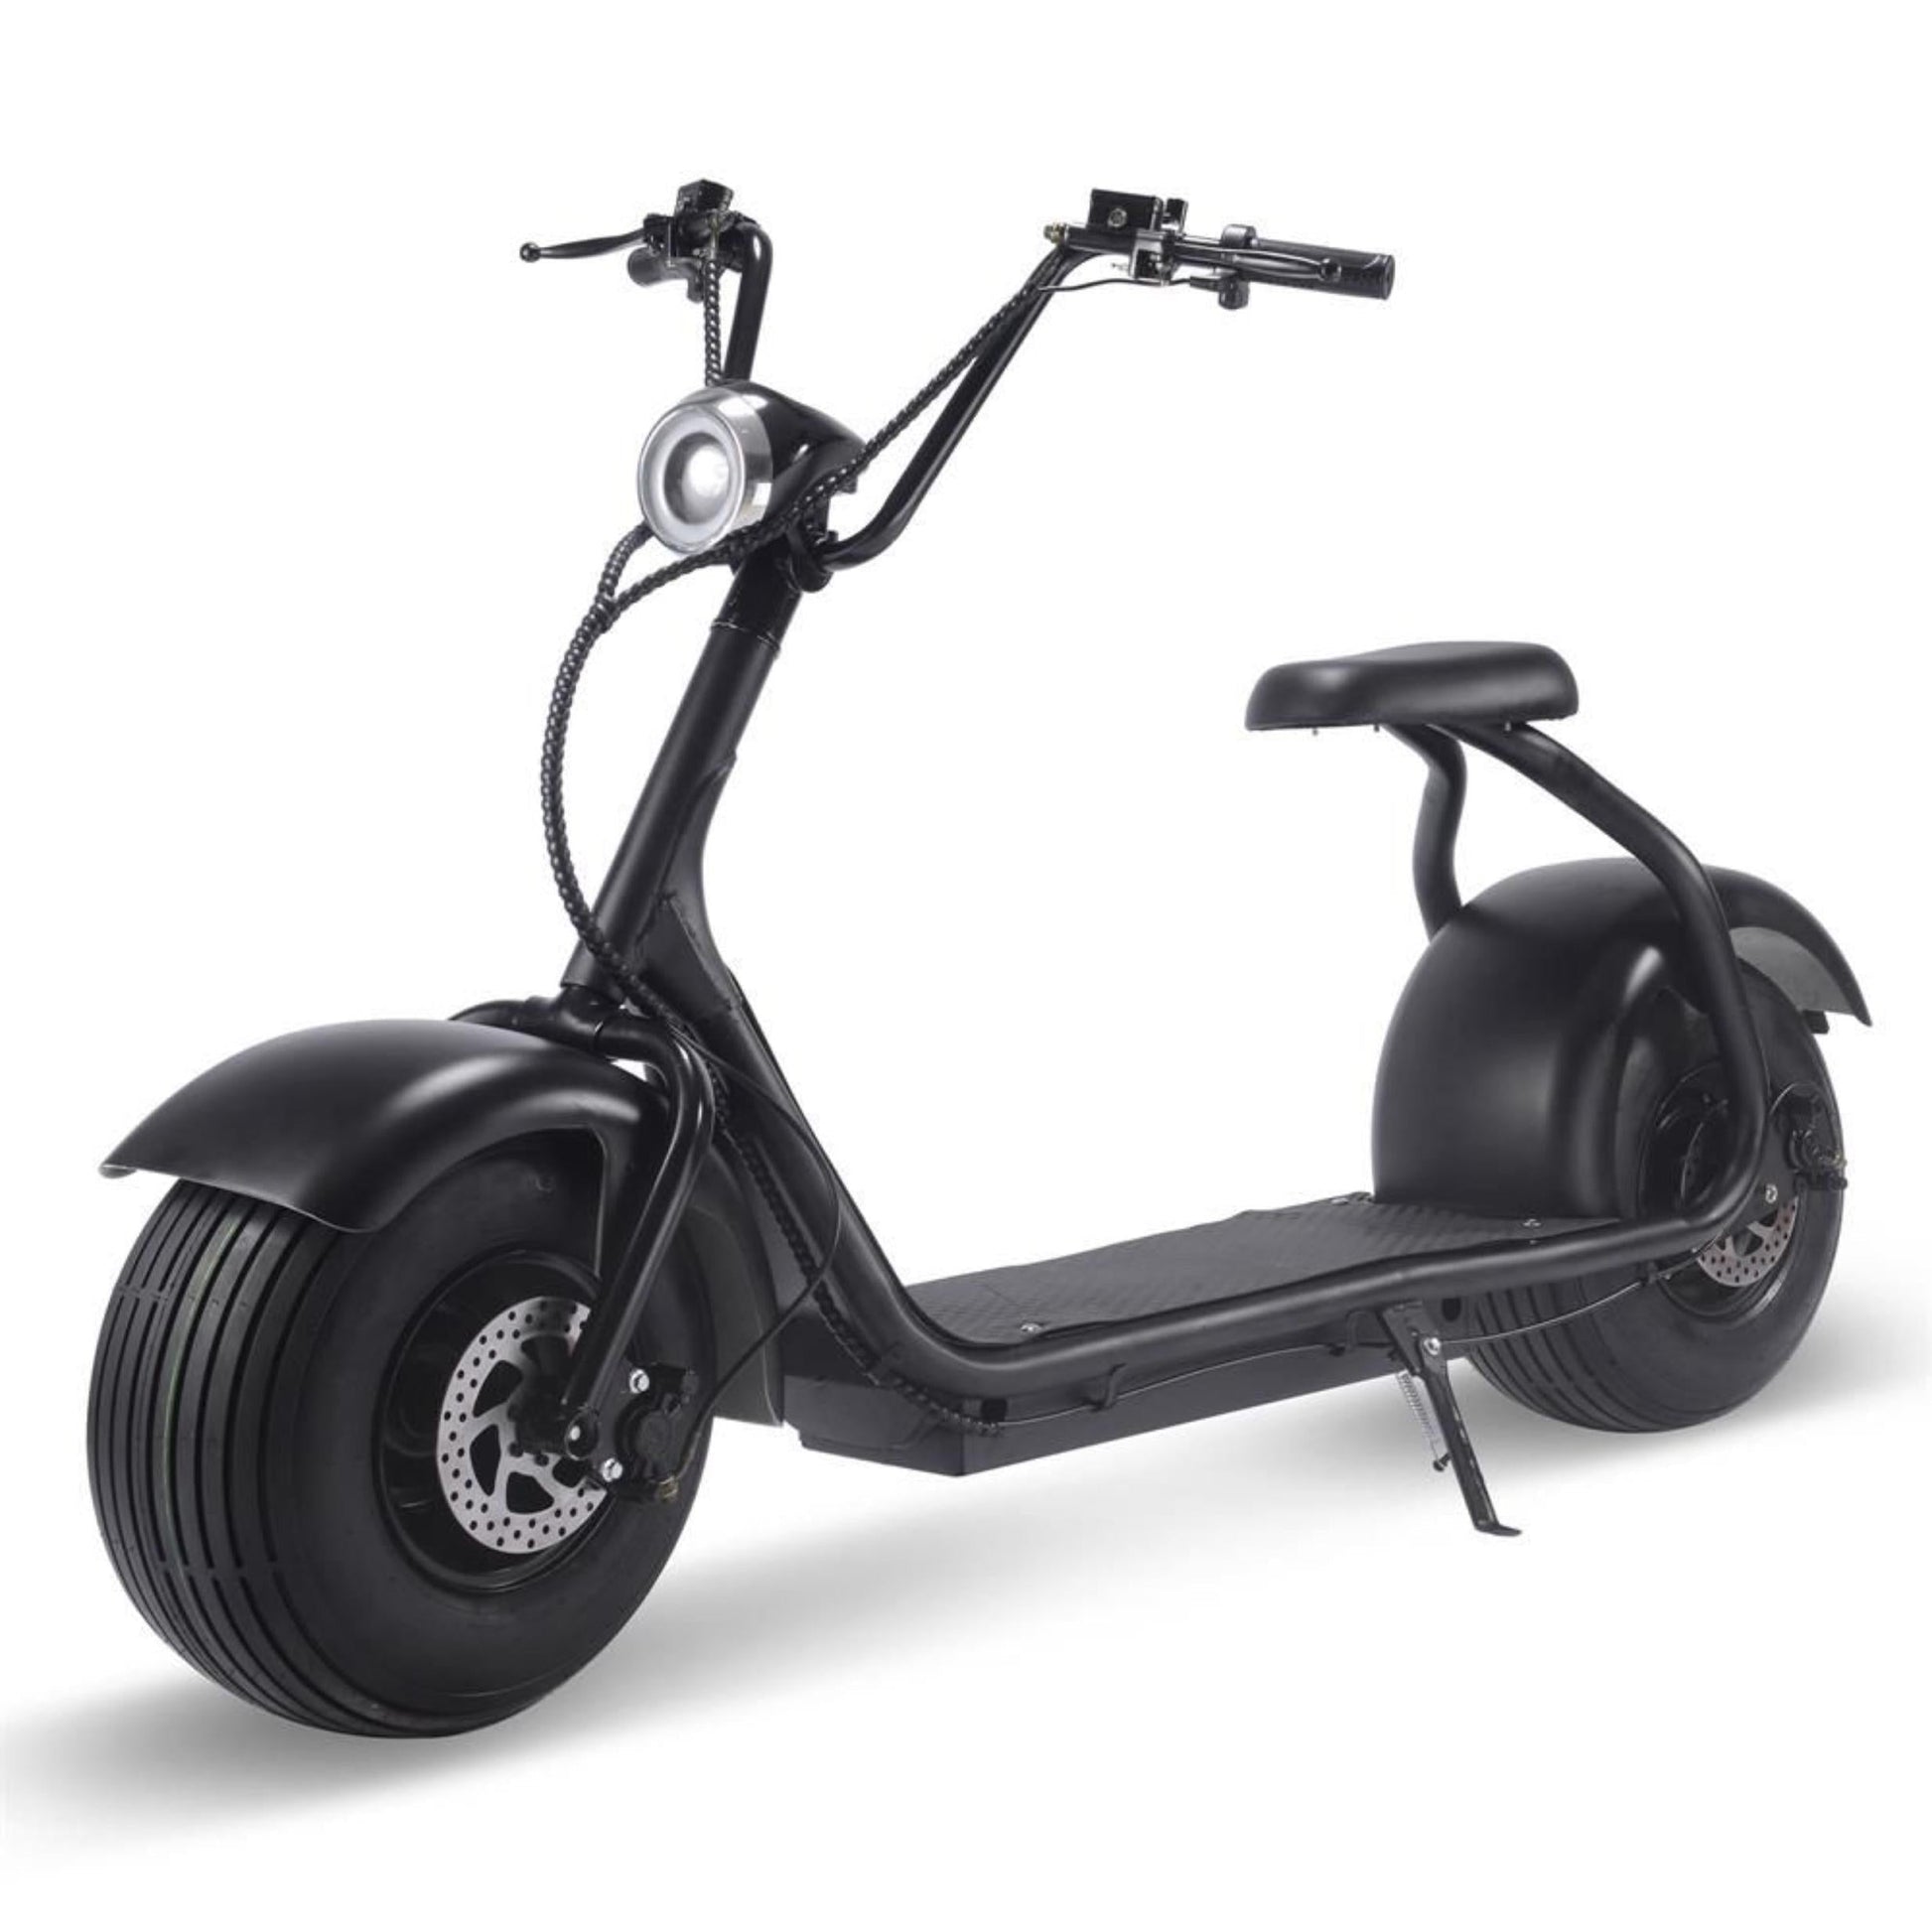 MotoTec Fat Tire 2000w Lithium Electric Scooter Black - Powered